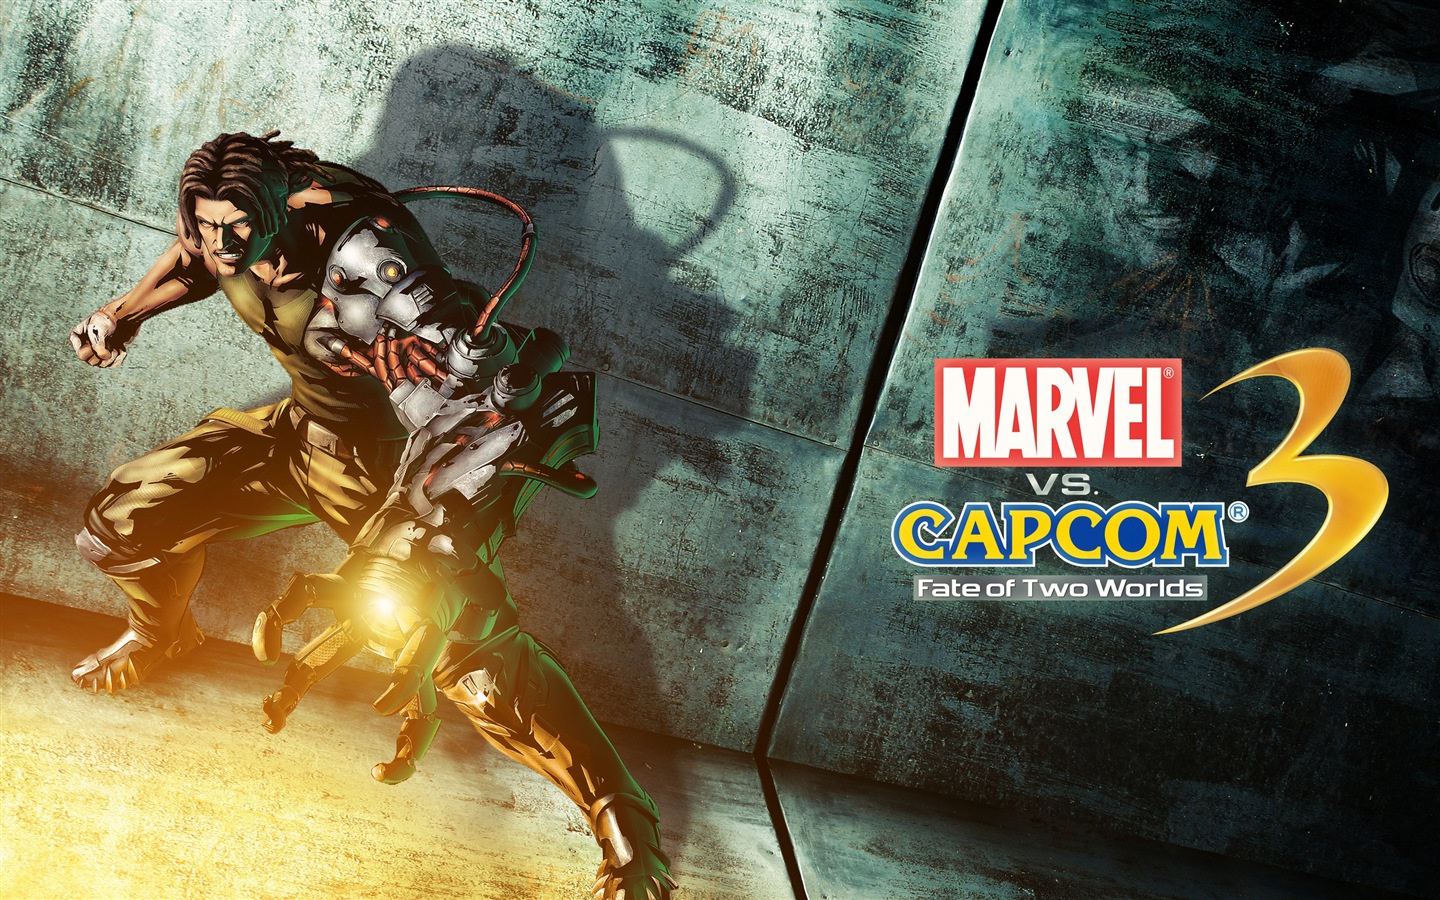 Marvel VS. Capcom 3: Fate of Two Worlds HD game wallpapers #8 - 1440x900